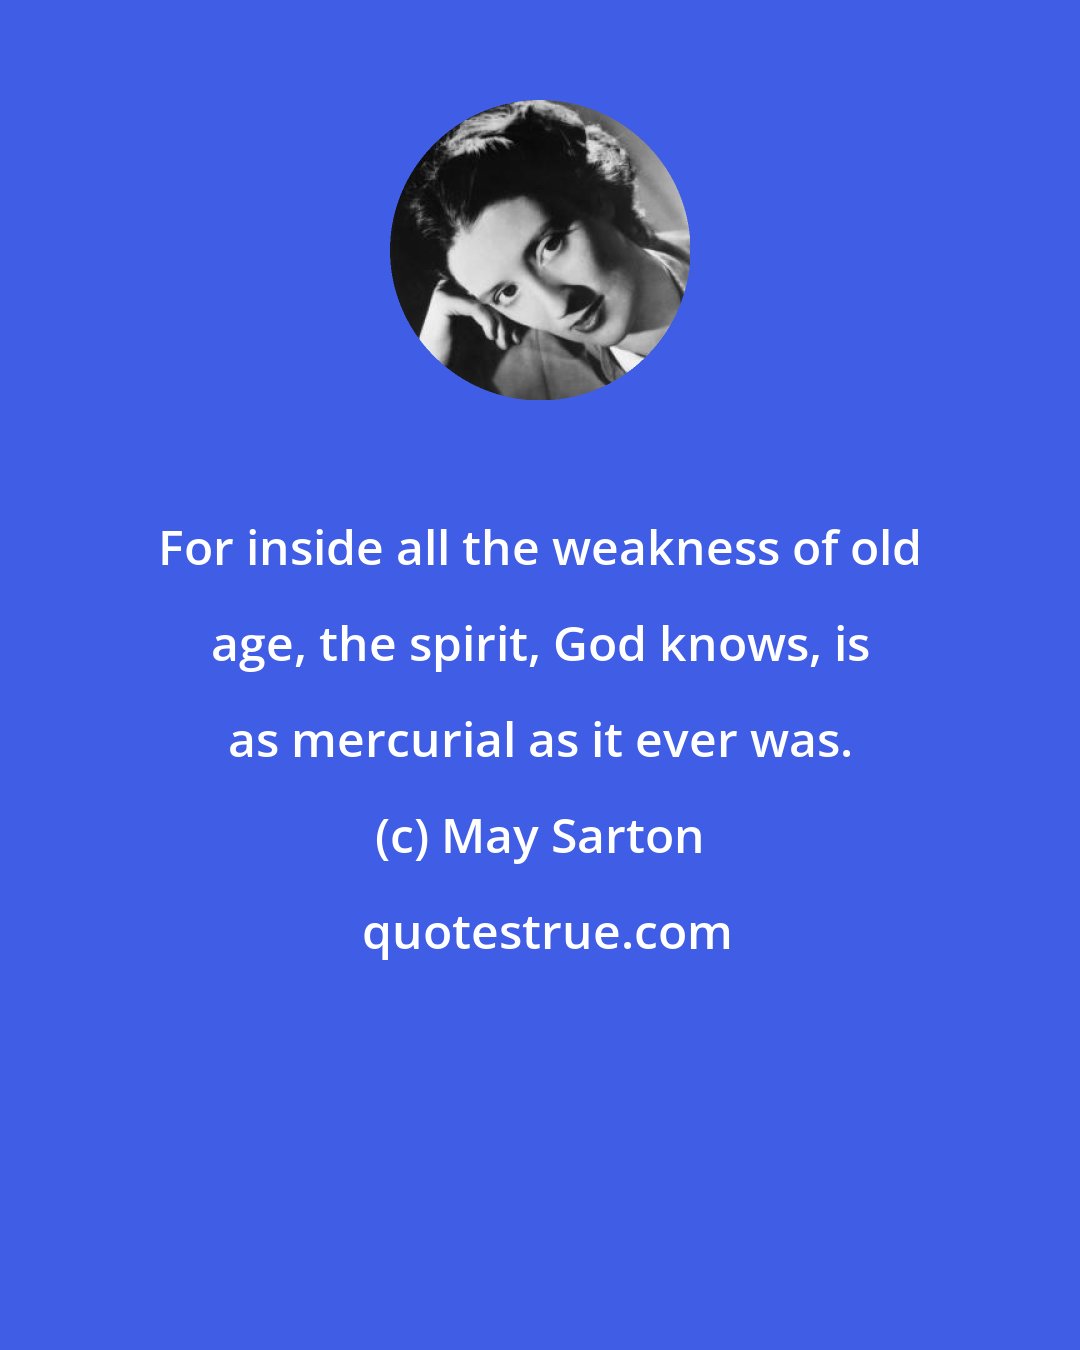 May Sarton: For inside all the weakness of old age, the spirit, God knows, is as mercurial as it ever was.